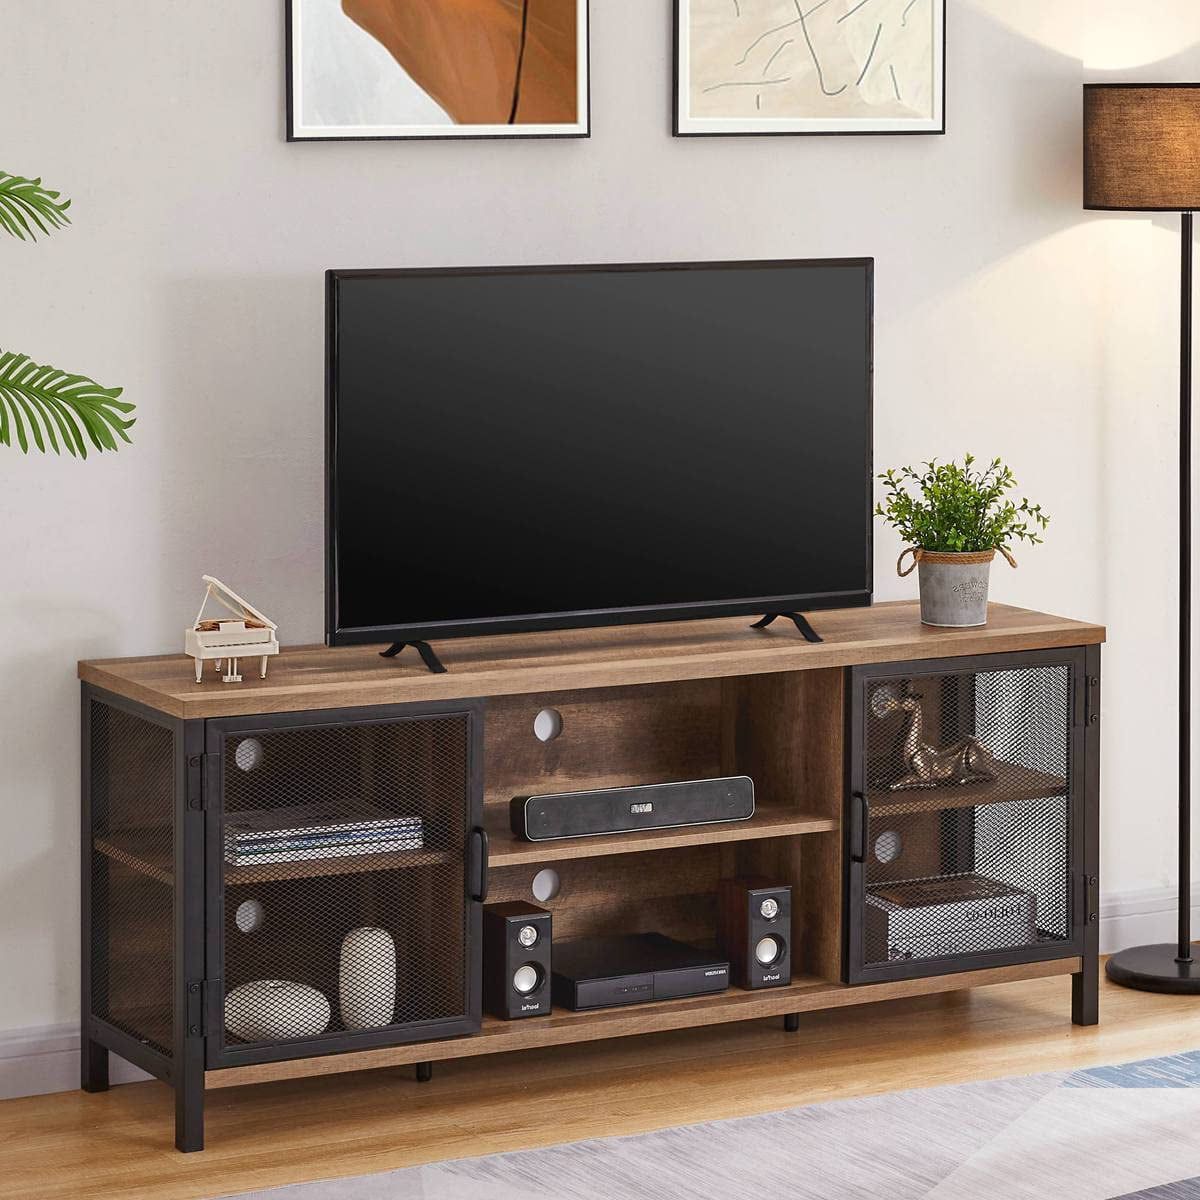 Wide Entertainment Centers For Well Known Zzpface Industrial Entertainment Center For Tvs Up To 65 Inch, Rustic (View 5 of 15)